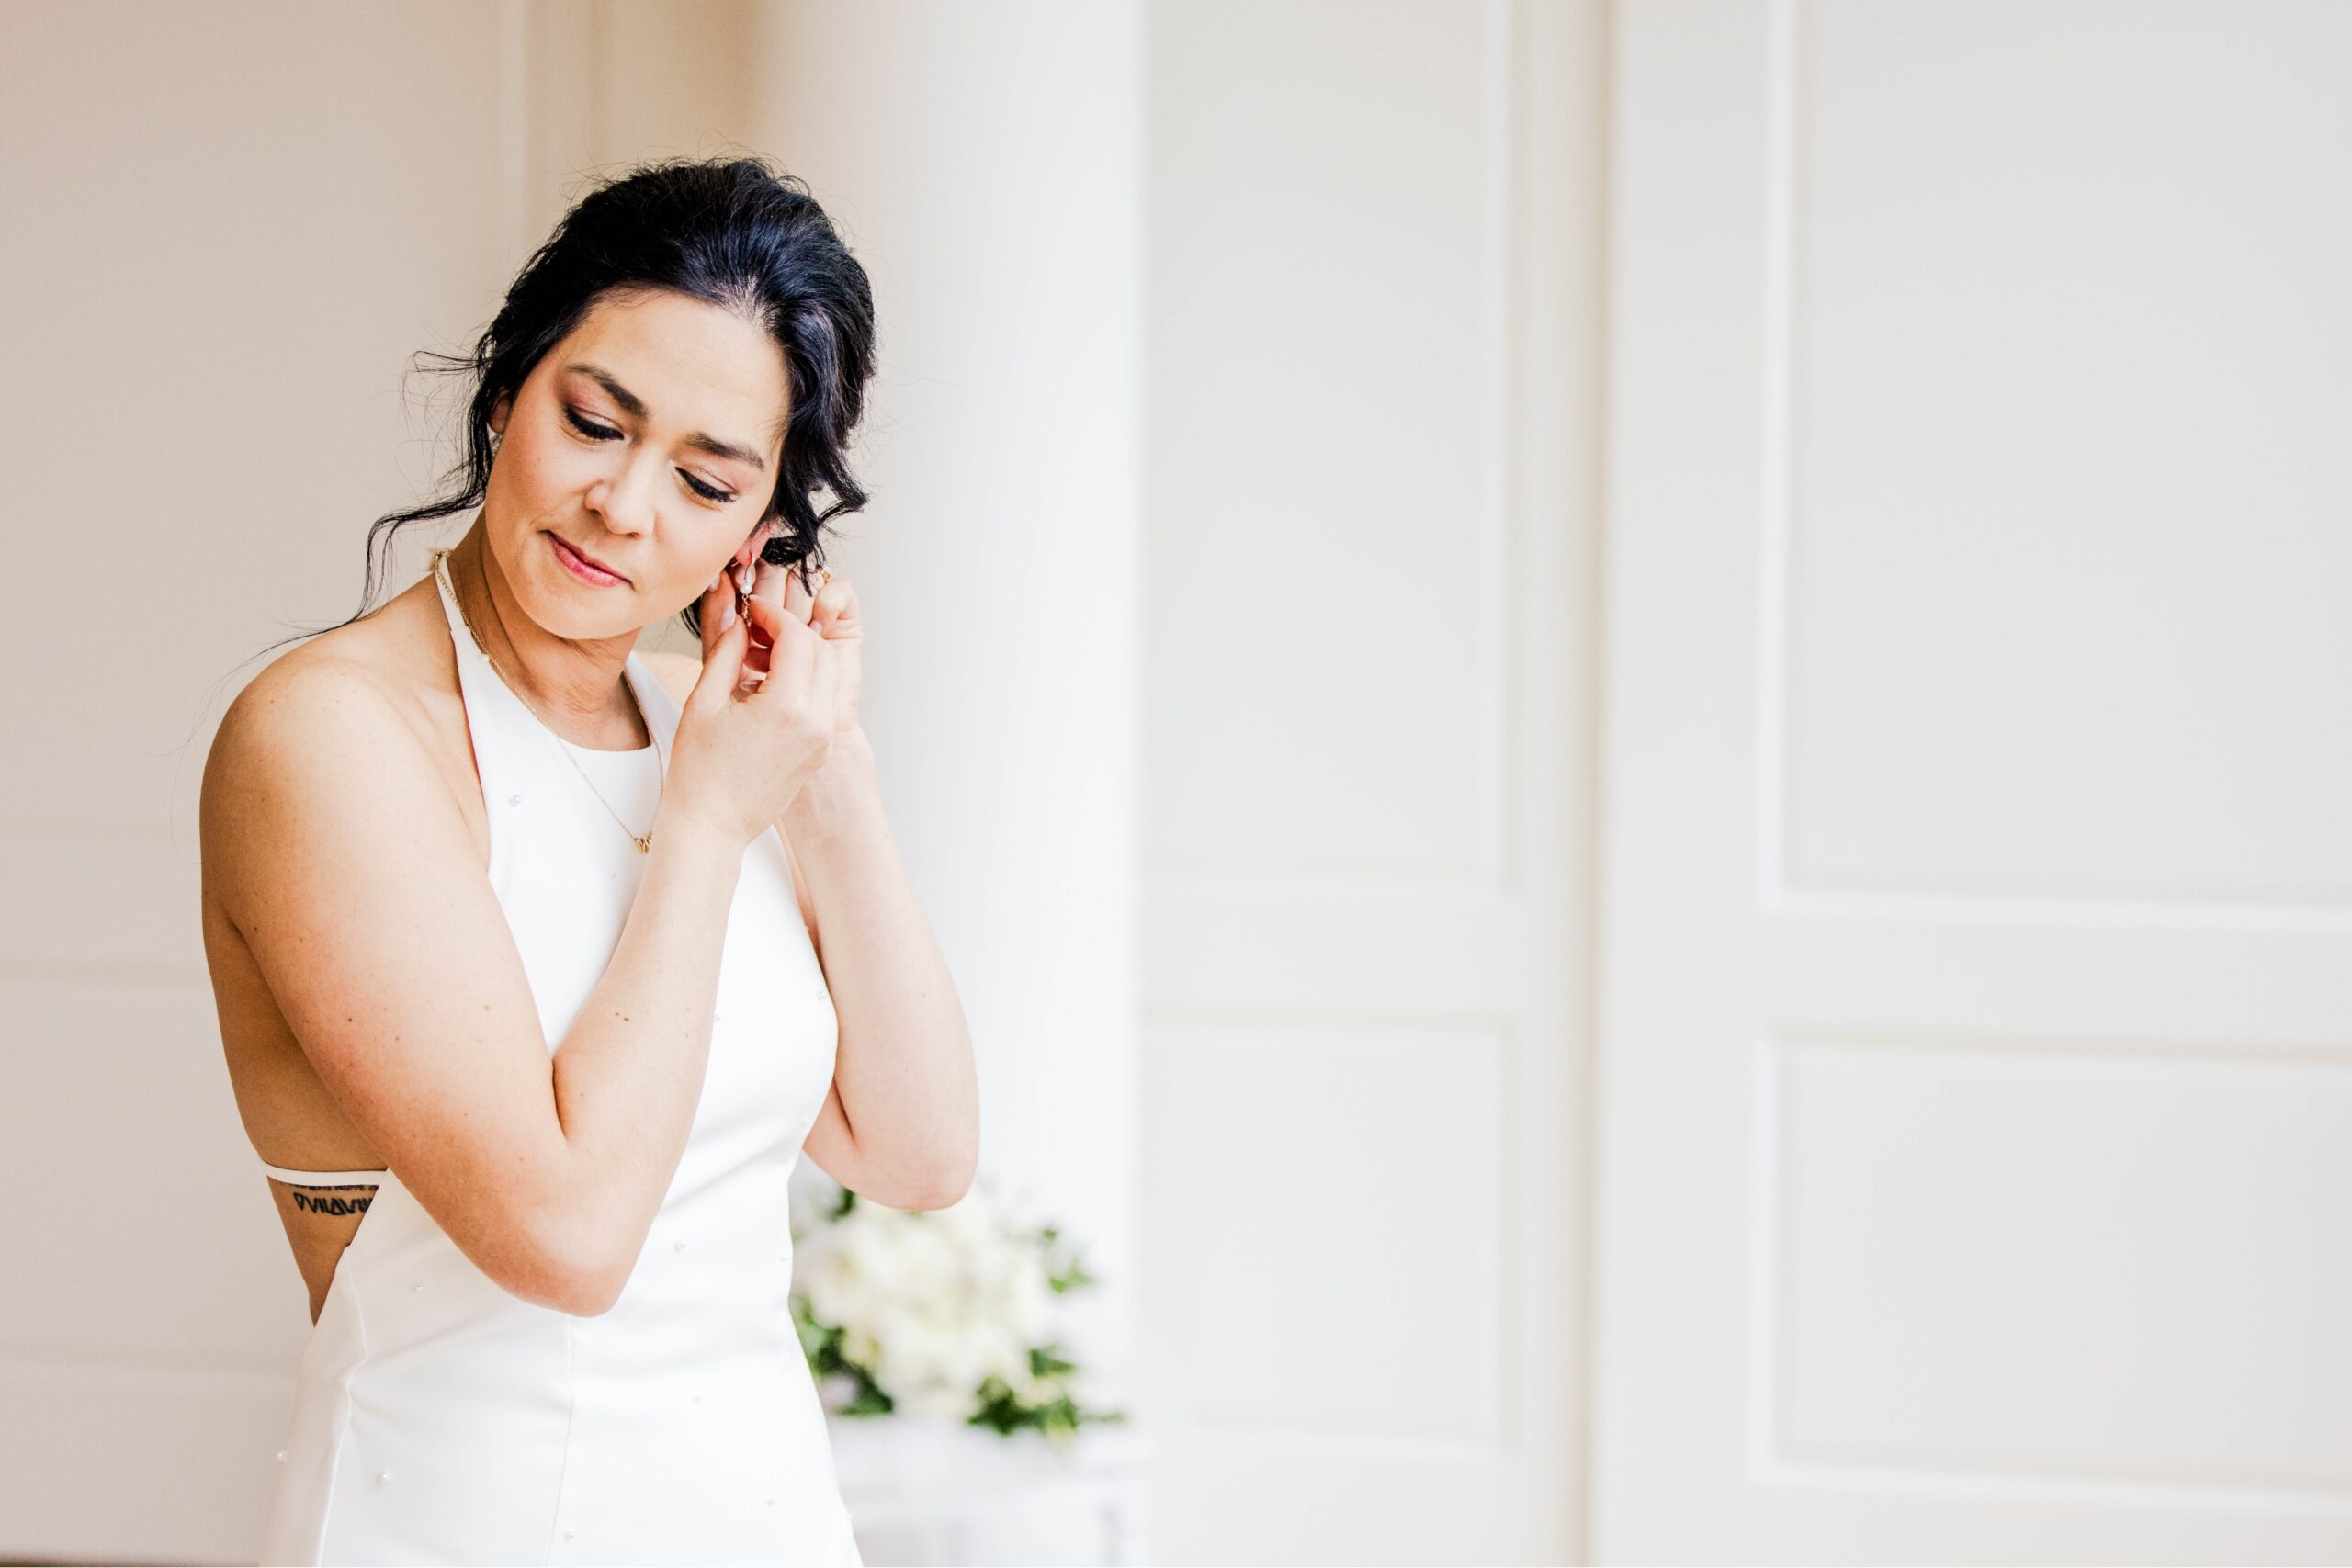 Natural light portrait of the bride putting on her earrings.